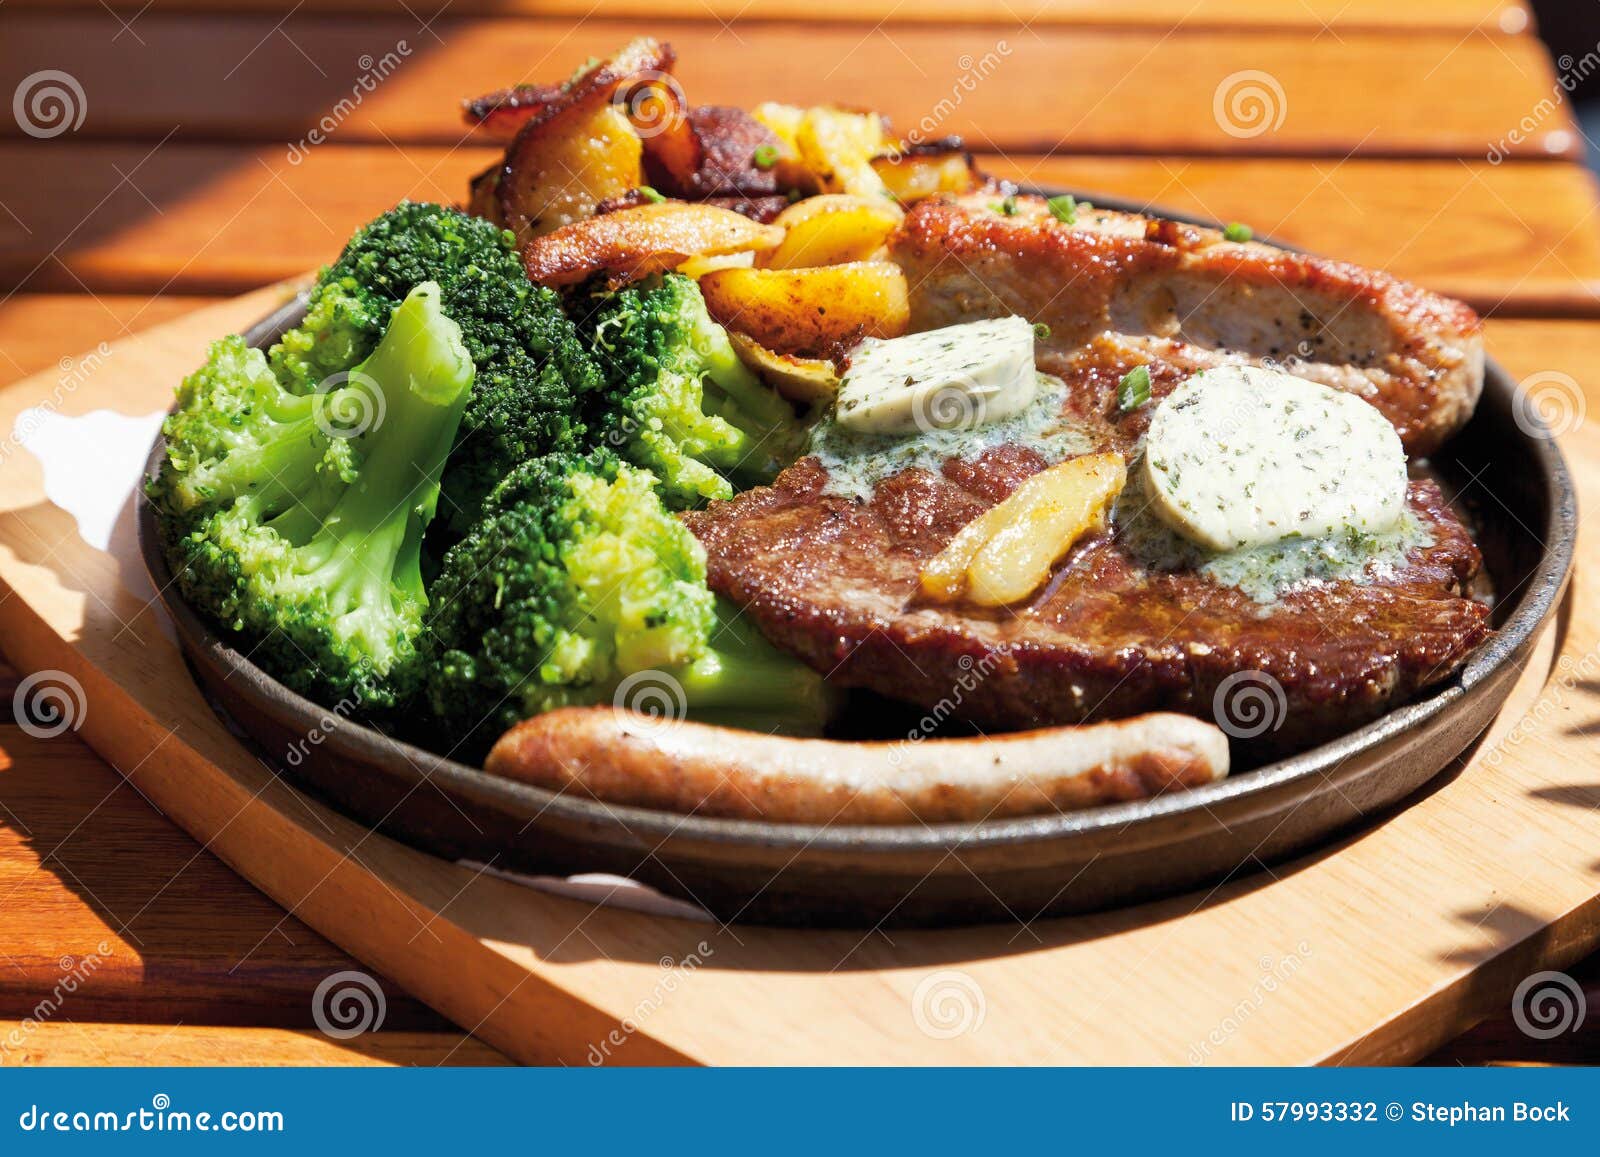 plate with vegetables and meat